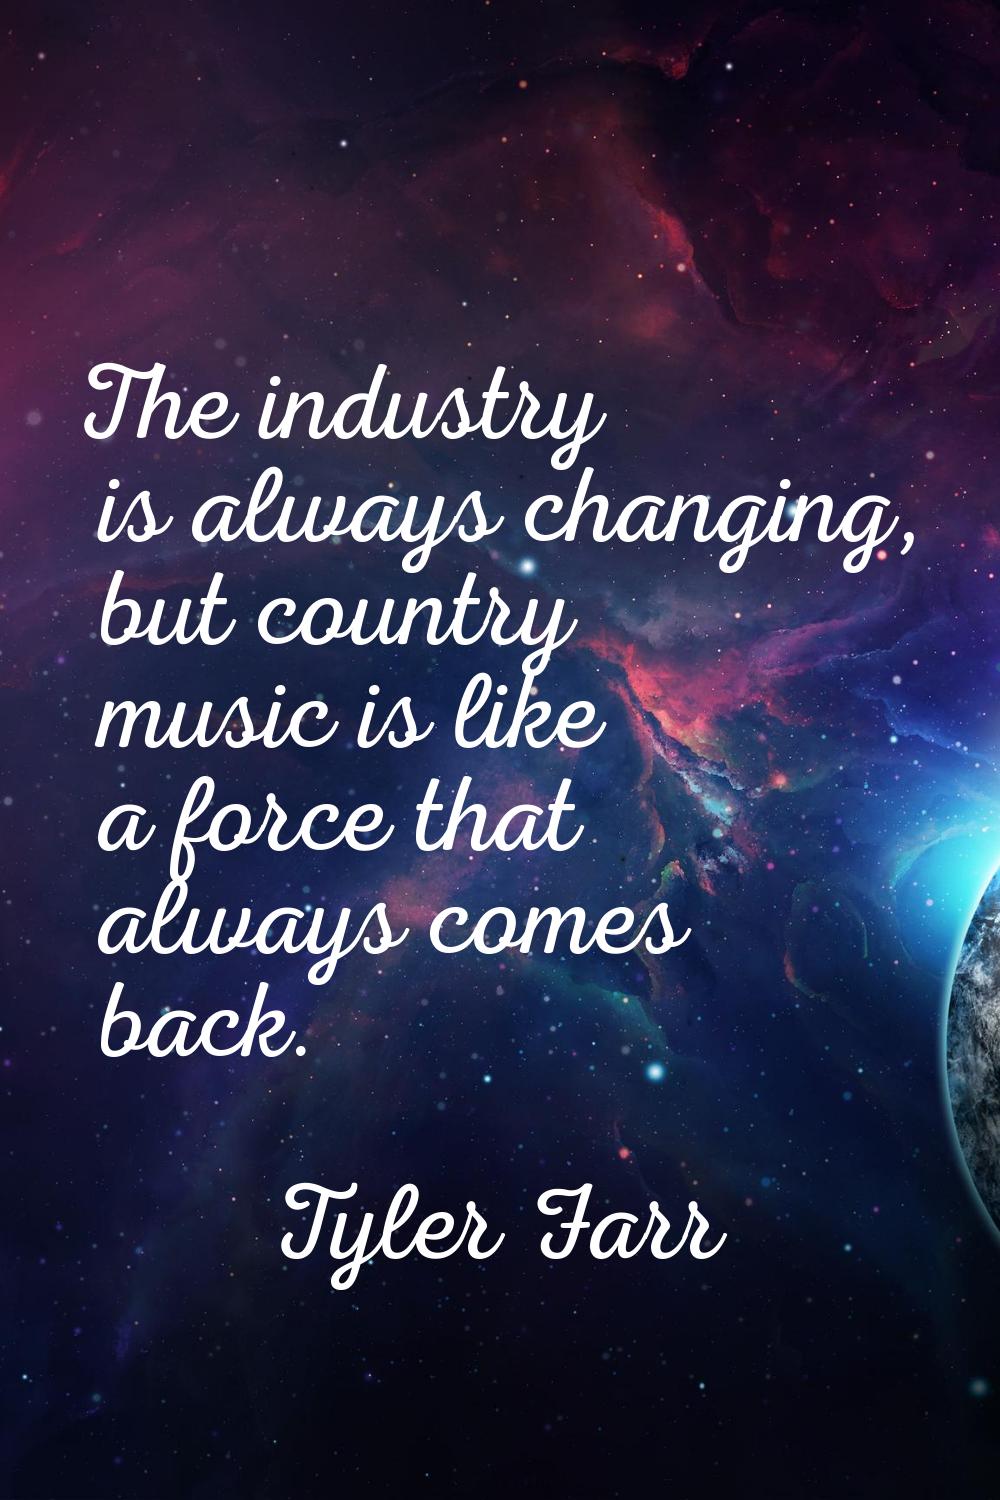 The industry is always changing, but country music is like a force that always comes back.